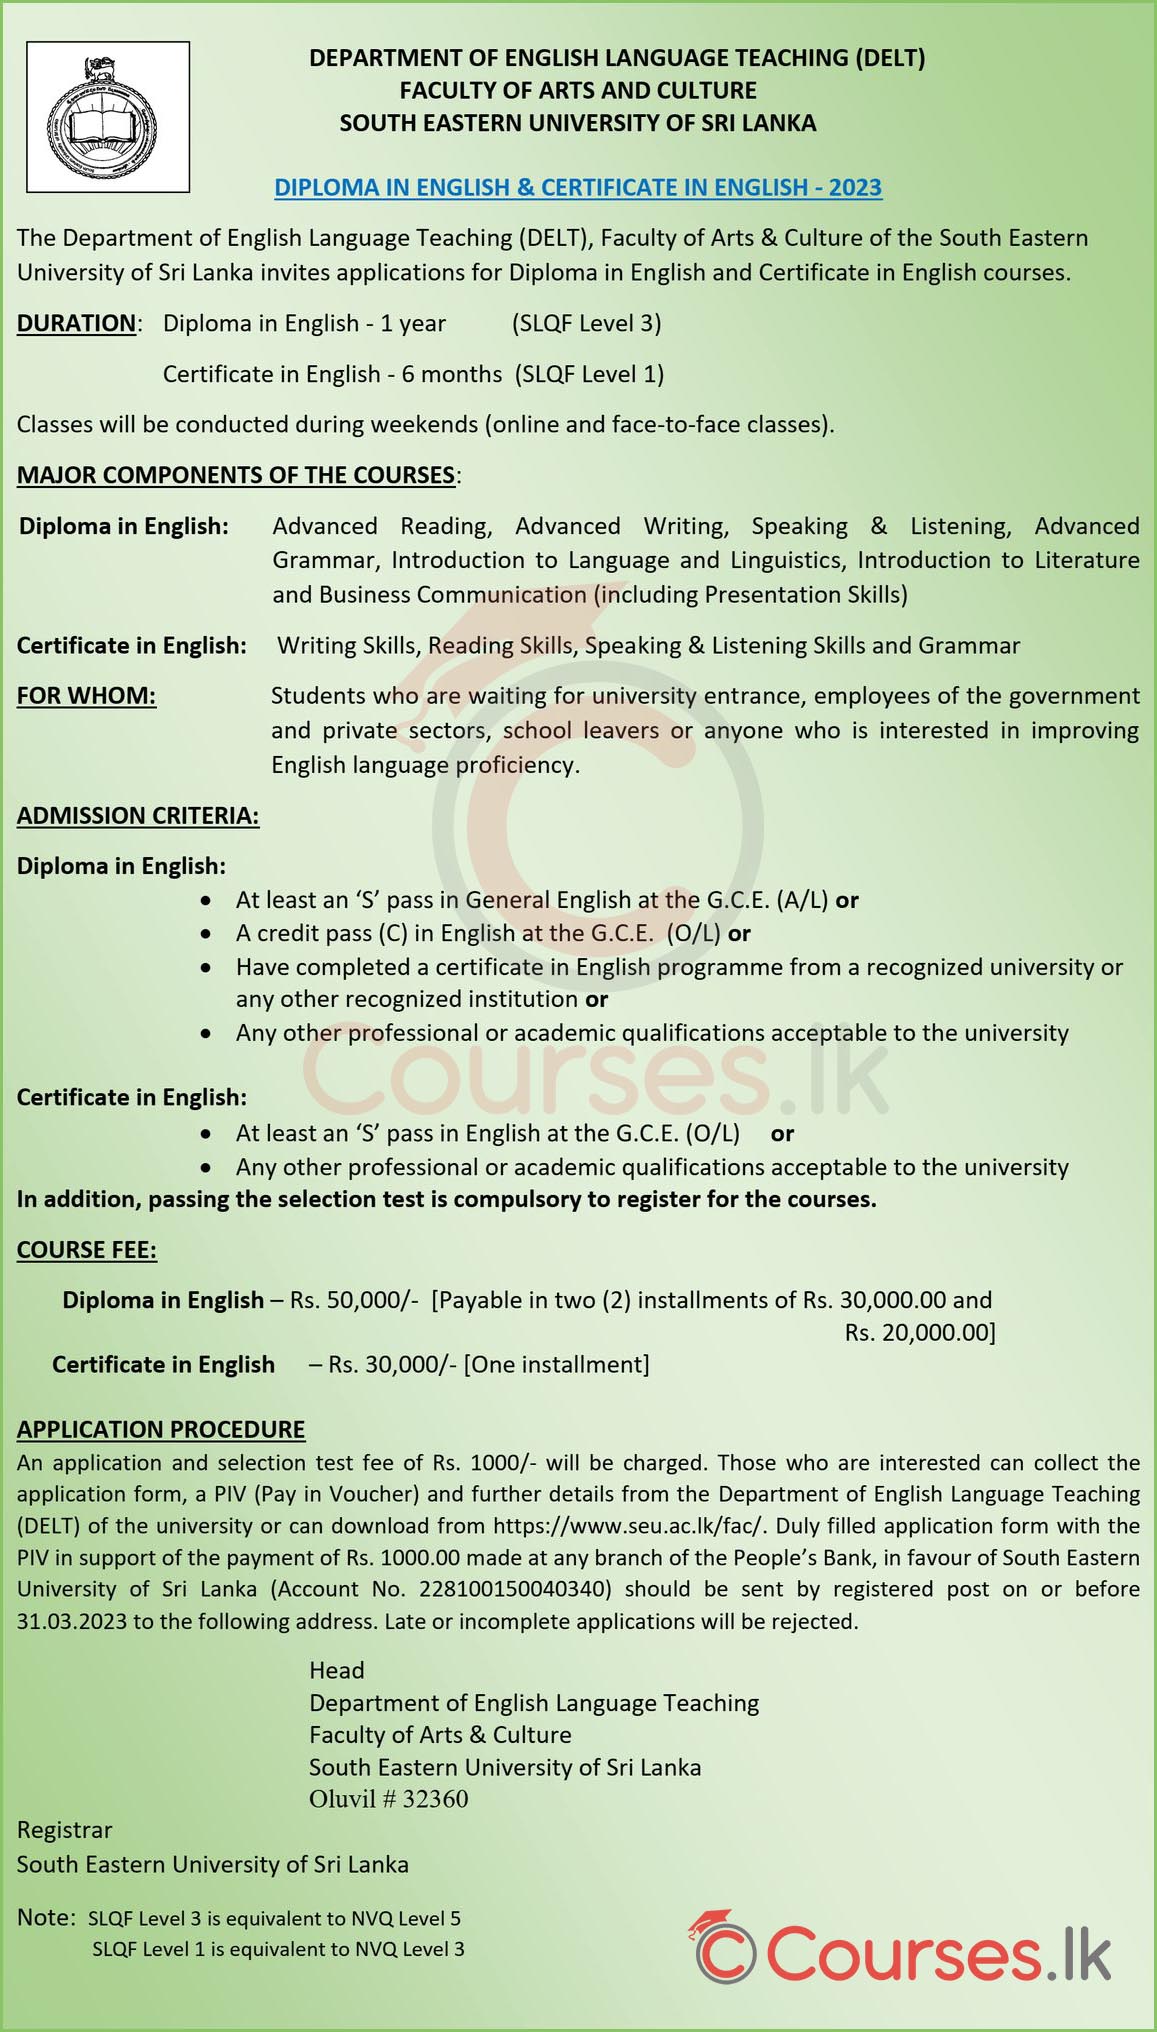 Call for Applications - Diploma / Certificate Courses in English Language (2023) - South Eastern University of Sri Lanka